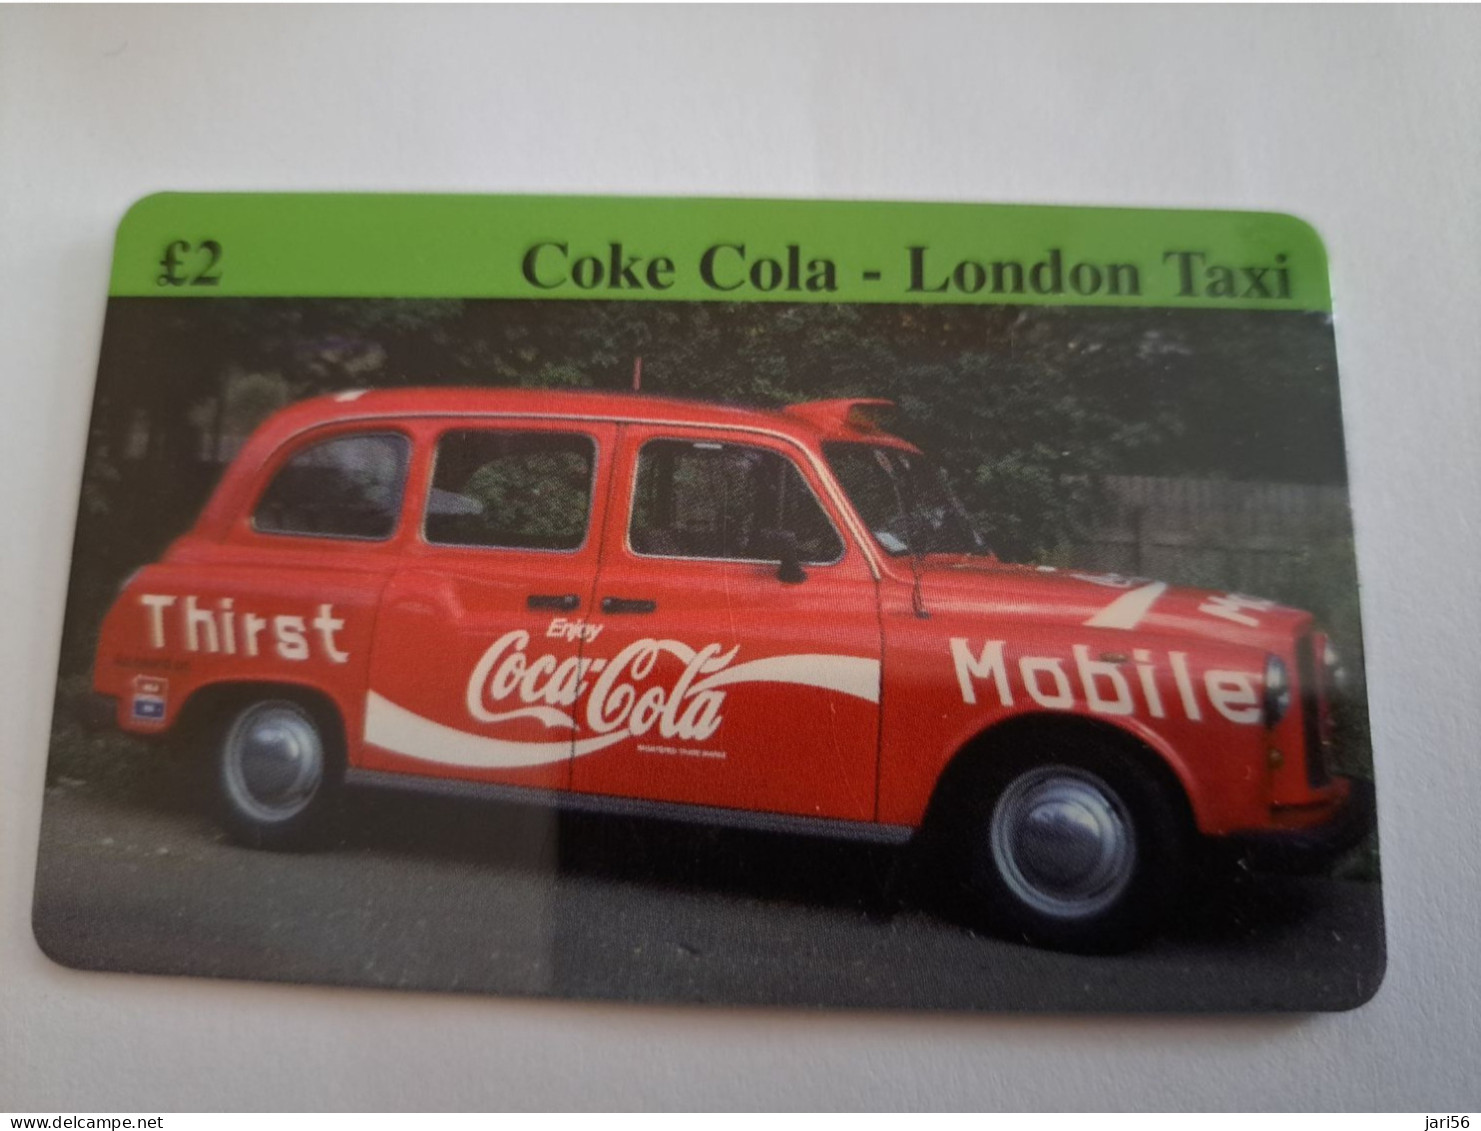 GREAT BRITAIN /2 POUND / COCA COLA / LONDON TAXI CAB/ CAR/ AUTO /    PHONECARD/  MINT  **15696** - [10] Collections